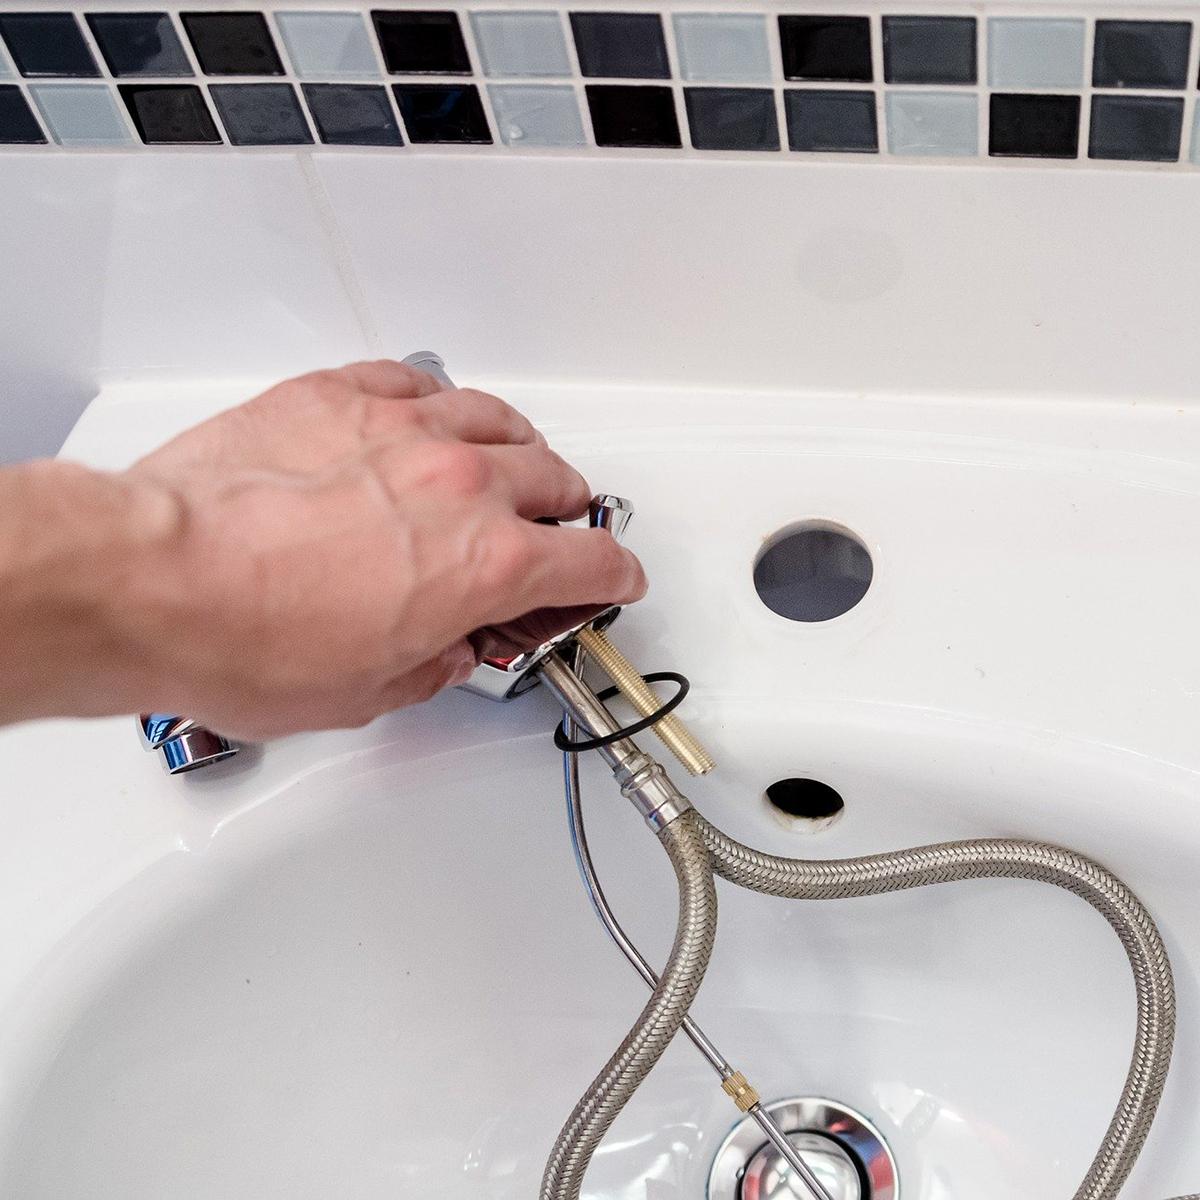 Install Basin Waste and Basin Tap in your Bathroom